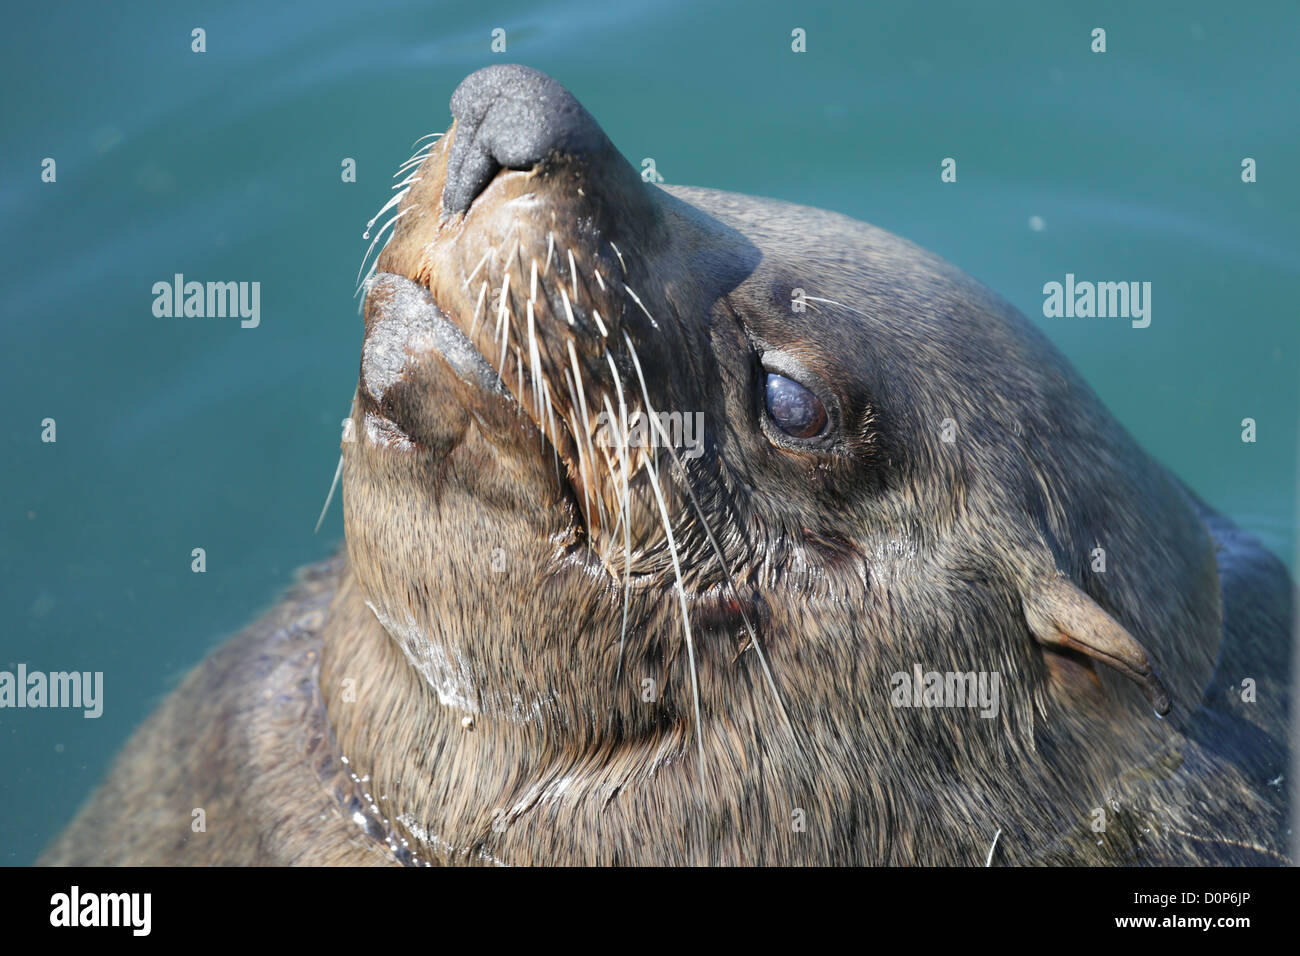 A Cape fur seal sticking its head out of the water and enjoying the warm sun with its eyes closed Stock Photo